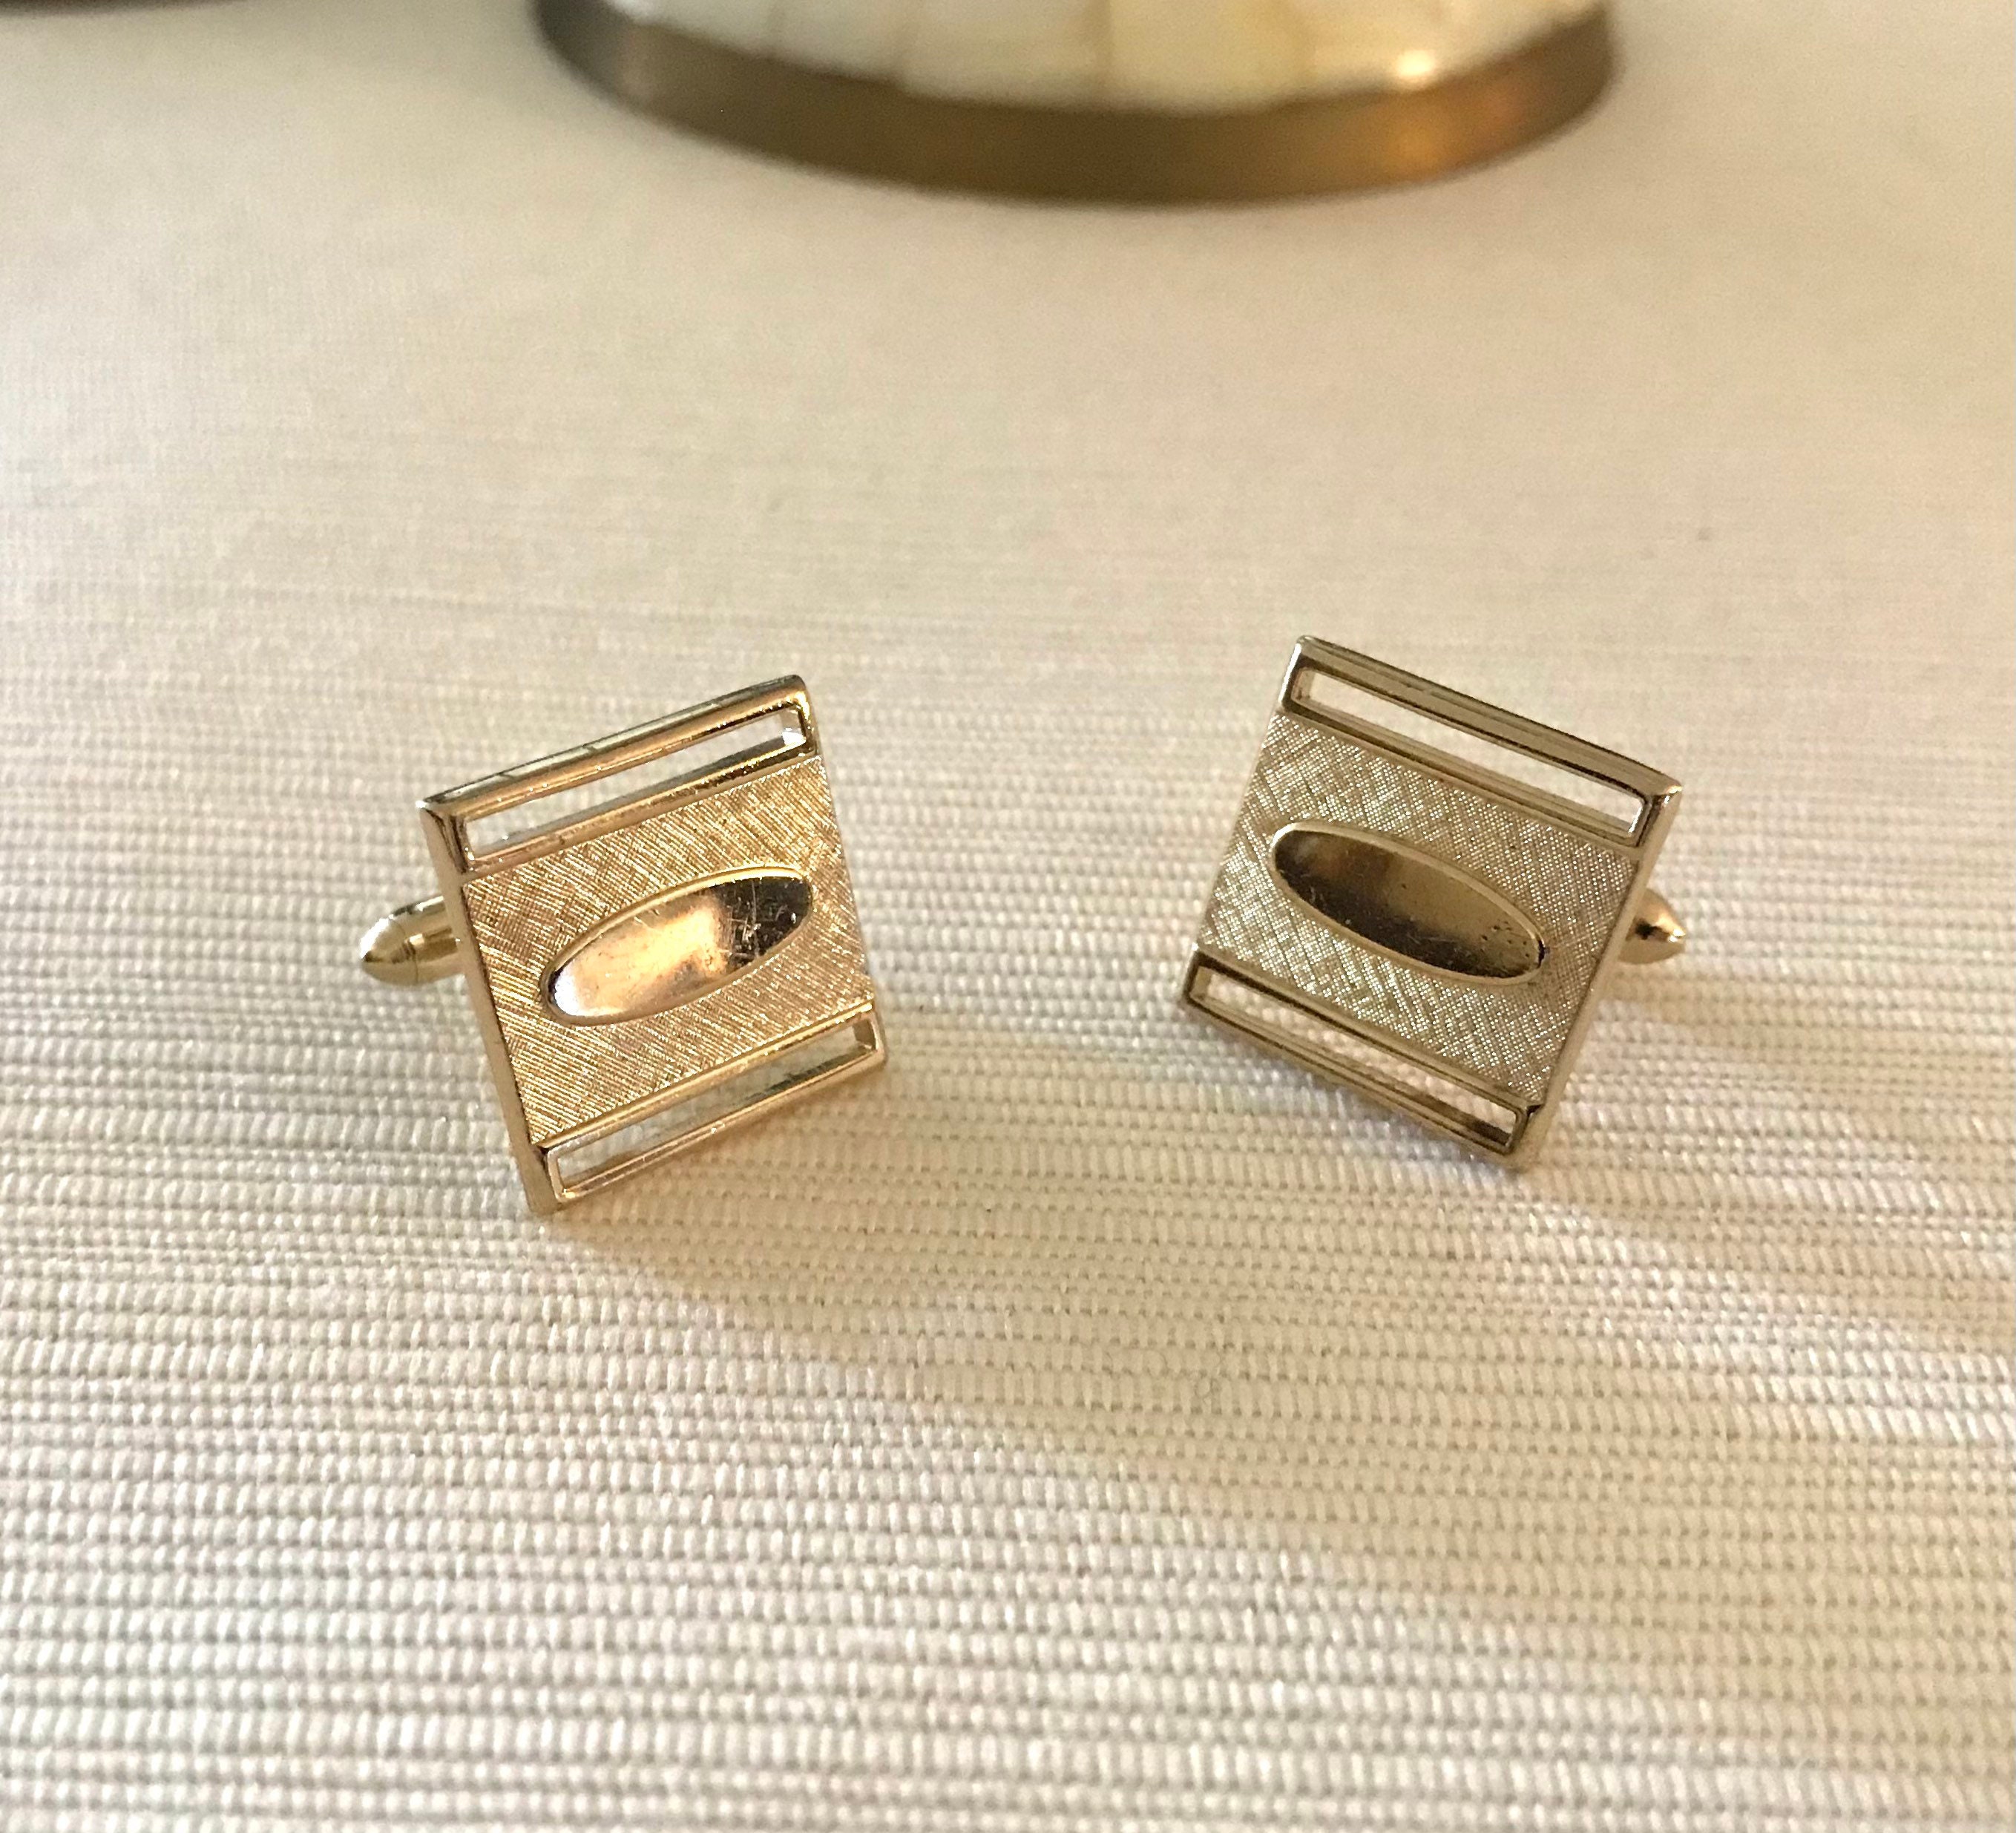 SWANK Golden Cufflinks, Square With Oval Middle, Brushed Gold - Etsy